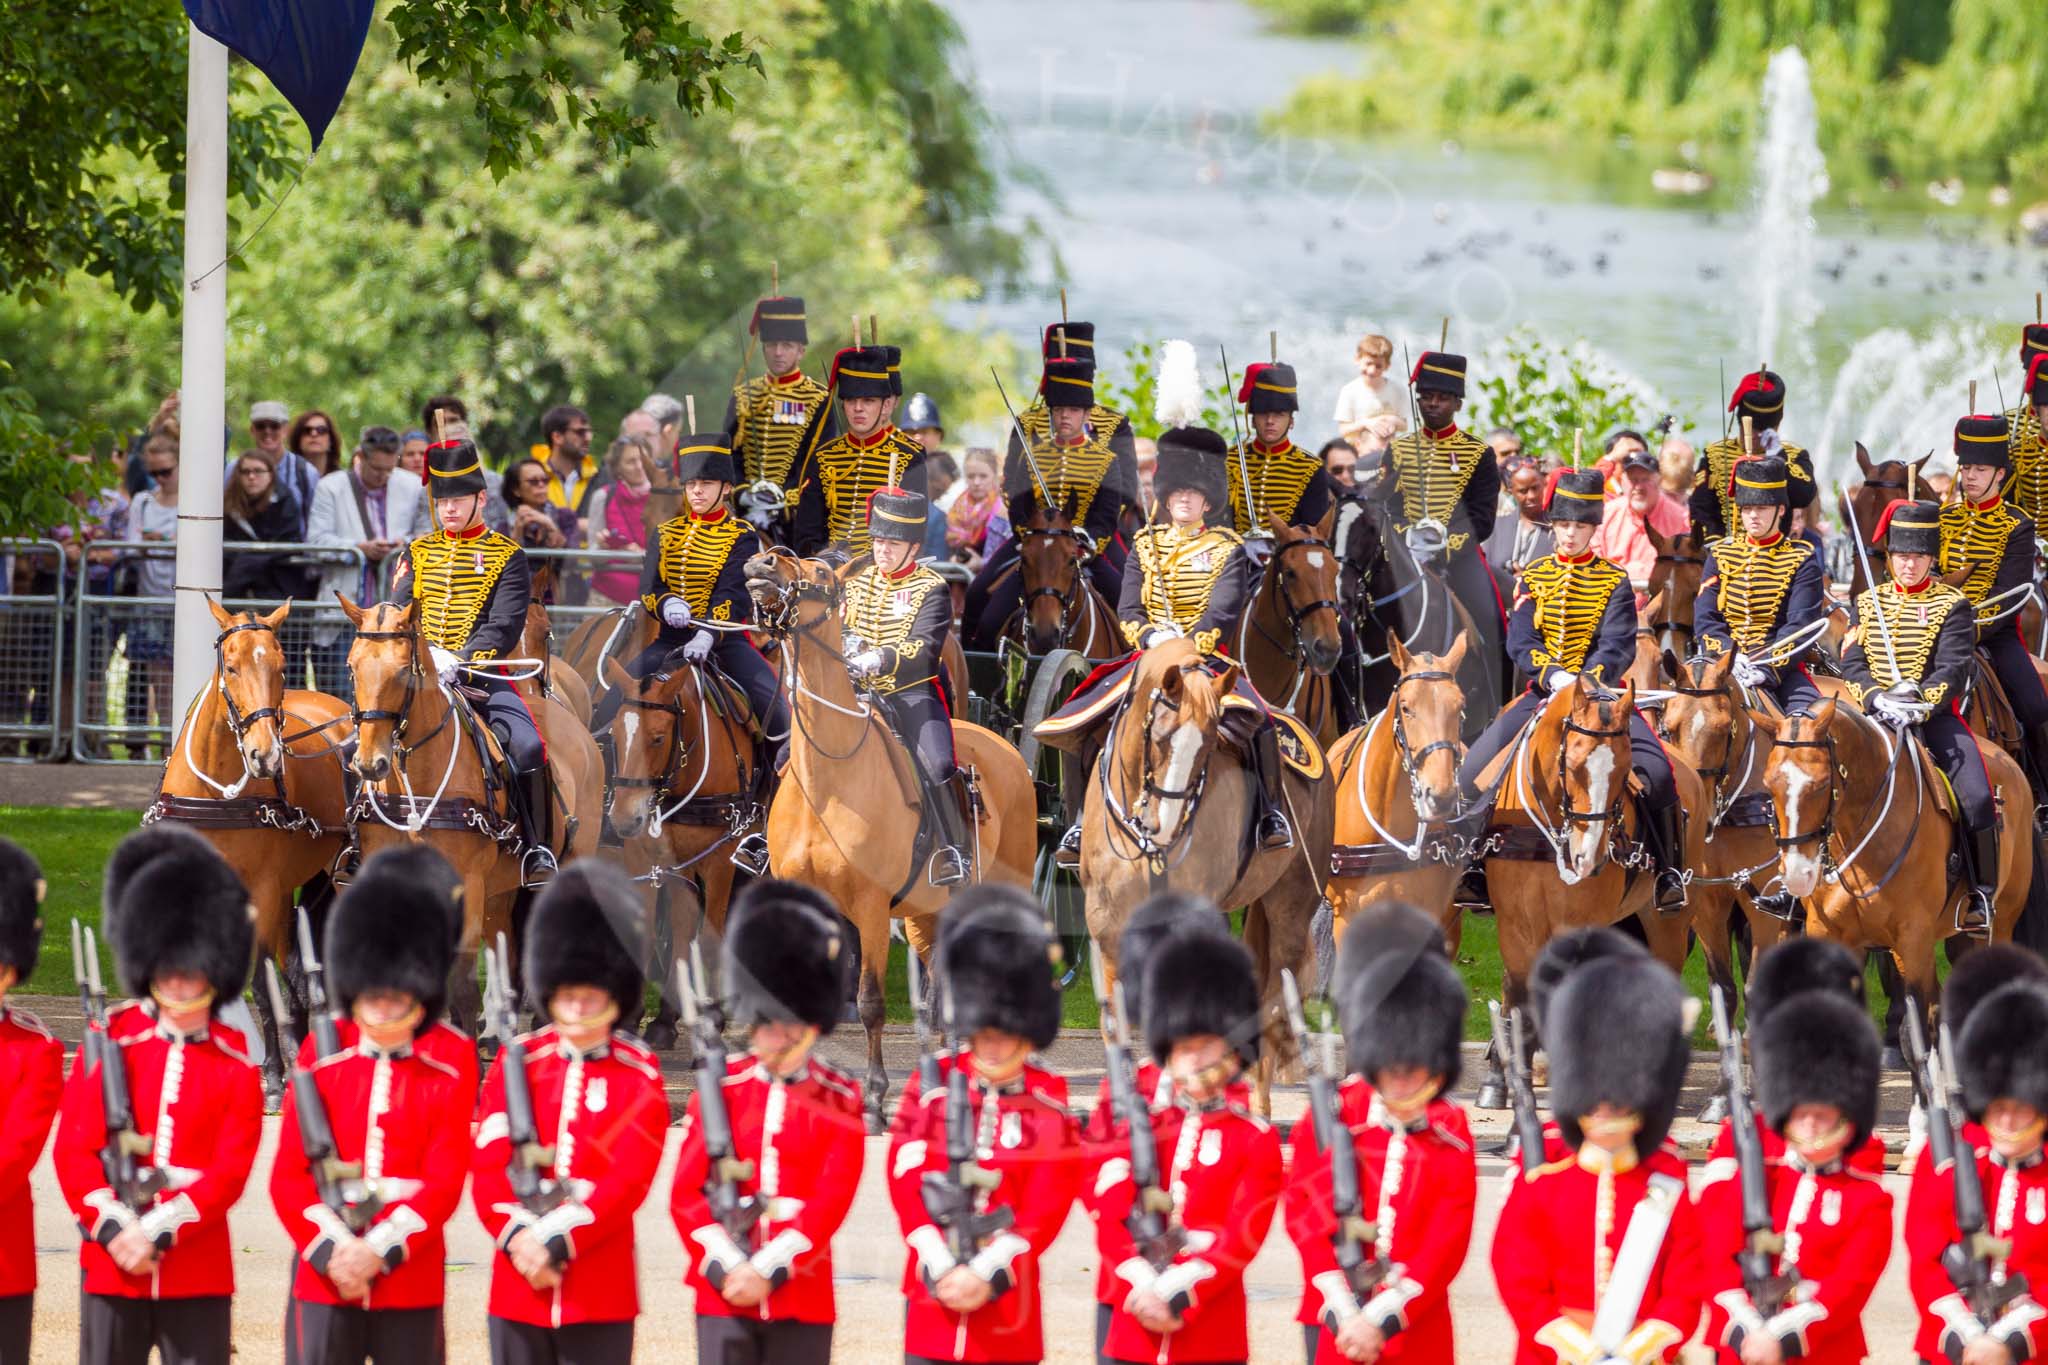 The Colonel's Review 2015.
Horse Guards Parade, Westminster,
London,

United Kingdom,
on 06 June 2015 at 10:48, image #141